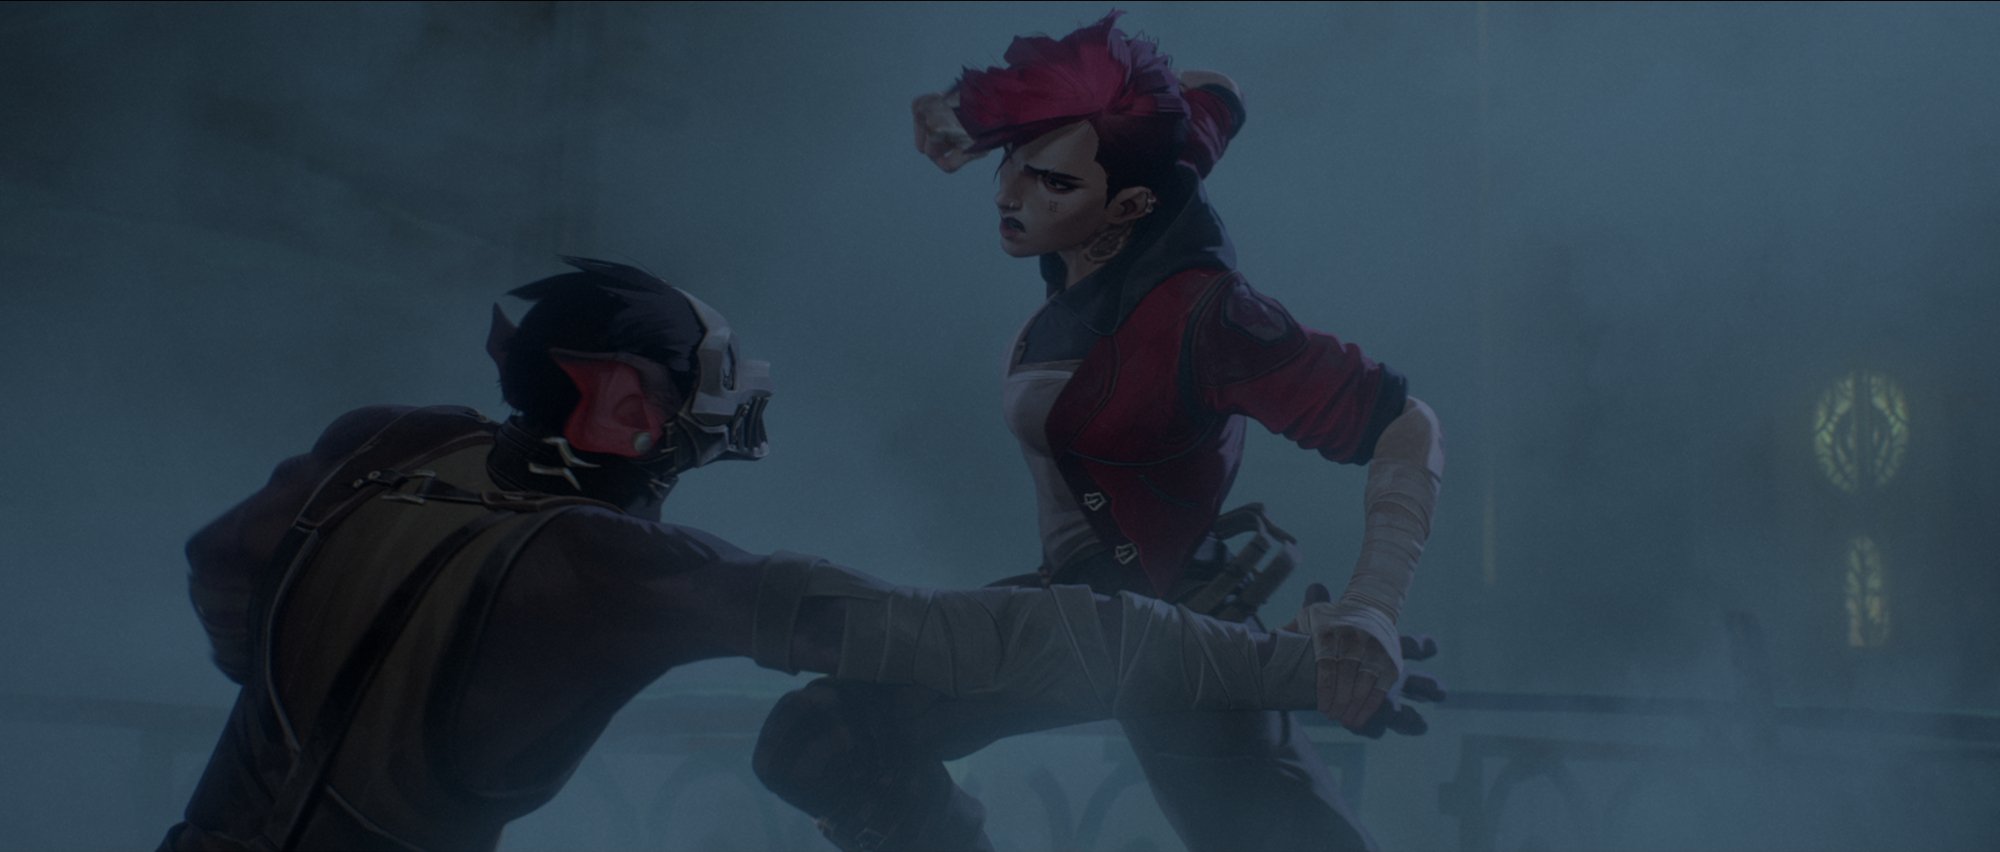 'Arcane' Hailee Steinfeld as Vi mid-air as she's about to throw a punch